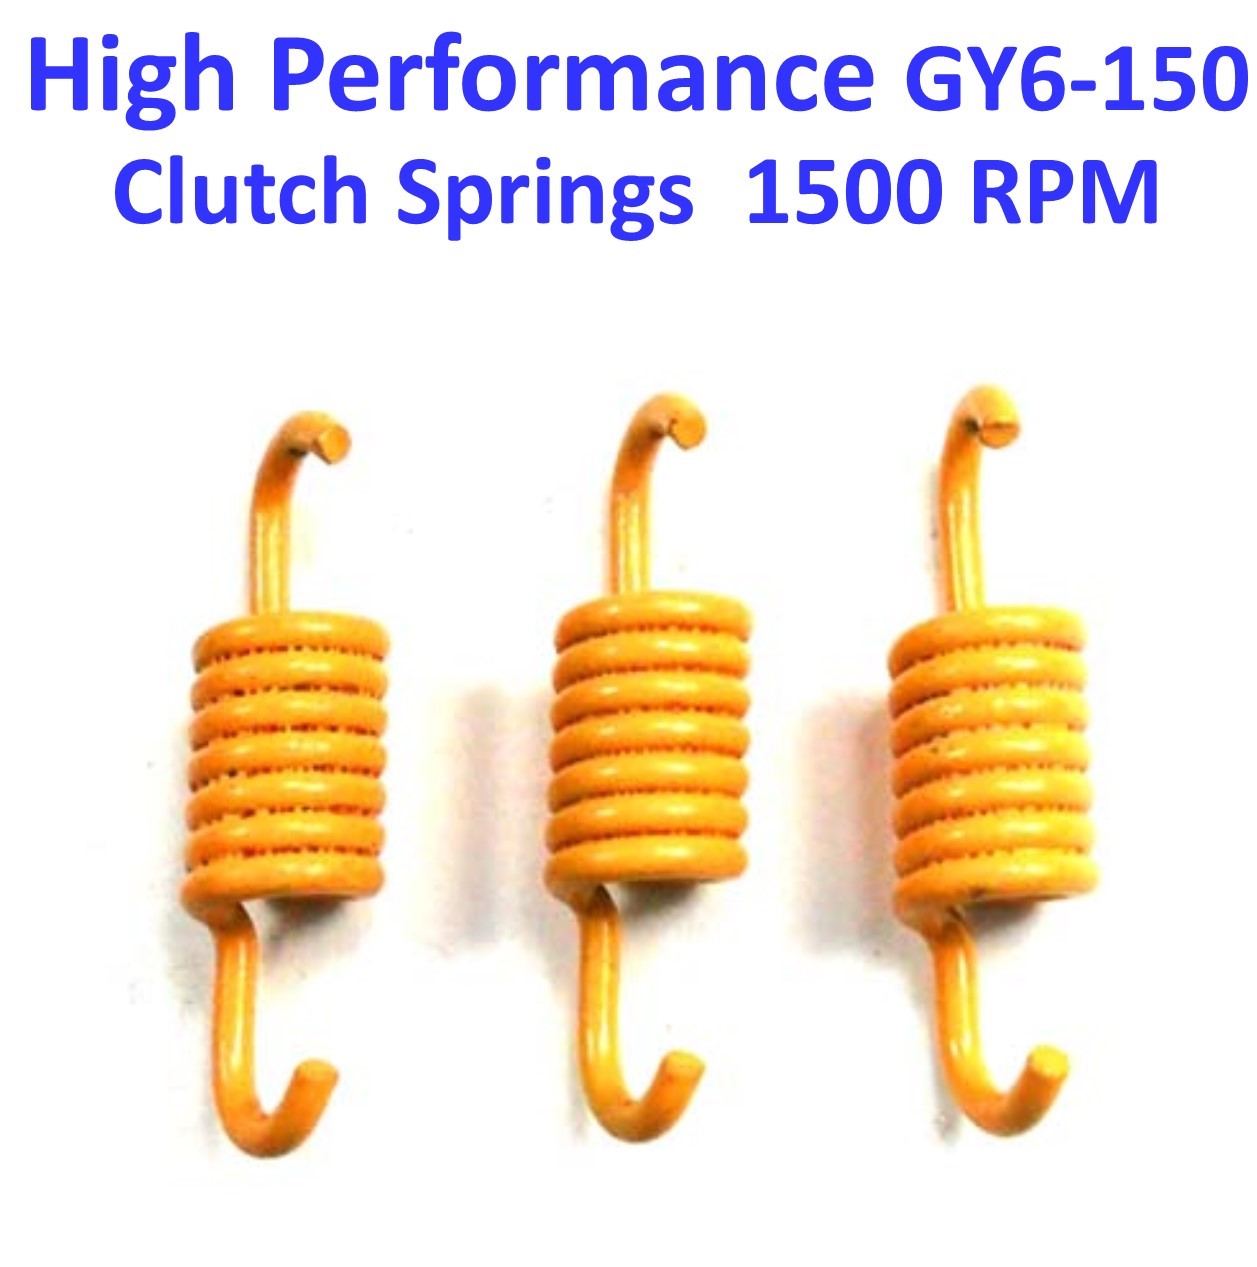 Clutch Spring Set HIGH PERFORMANCE Yellow +1500 RPM GY6-125, GY6-150 Chinese ATVs, GoKarts, Scooters